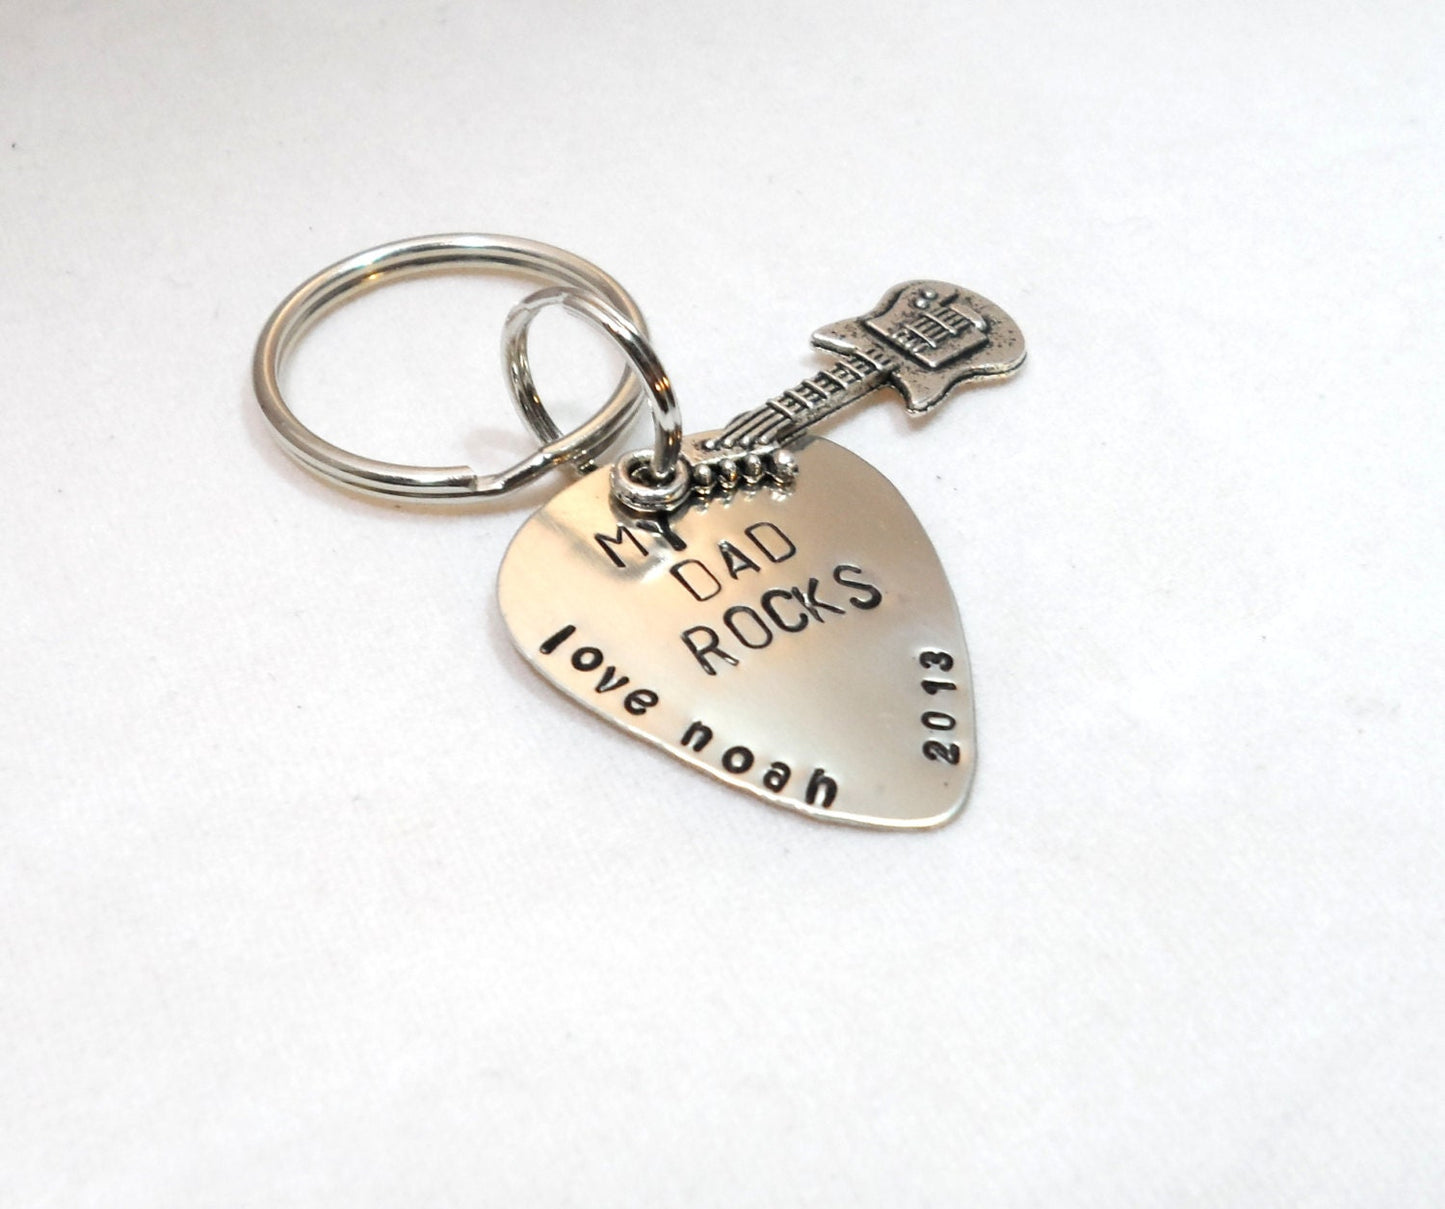 Keychain for Dad, Hand Stamped Guitar Pick, "My Dad Rocks", With Guitar Charm, Gift for Dad